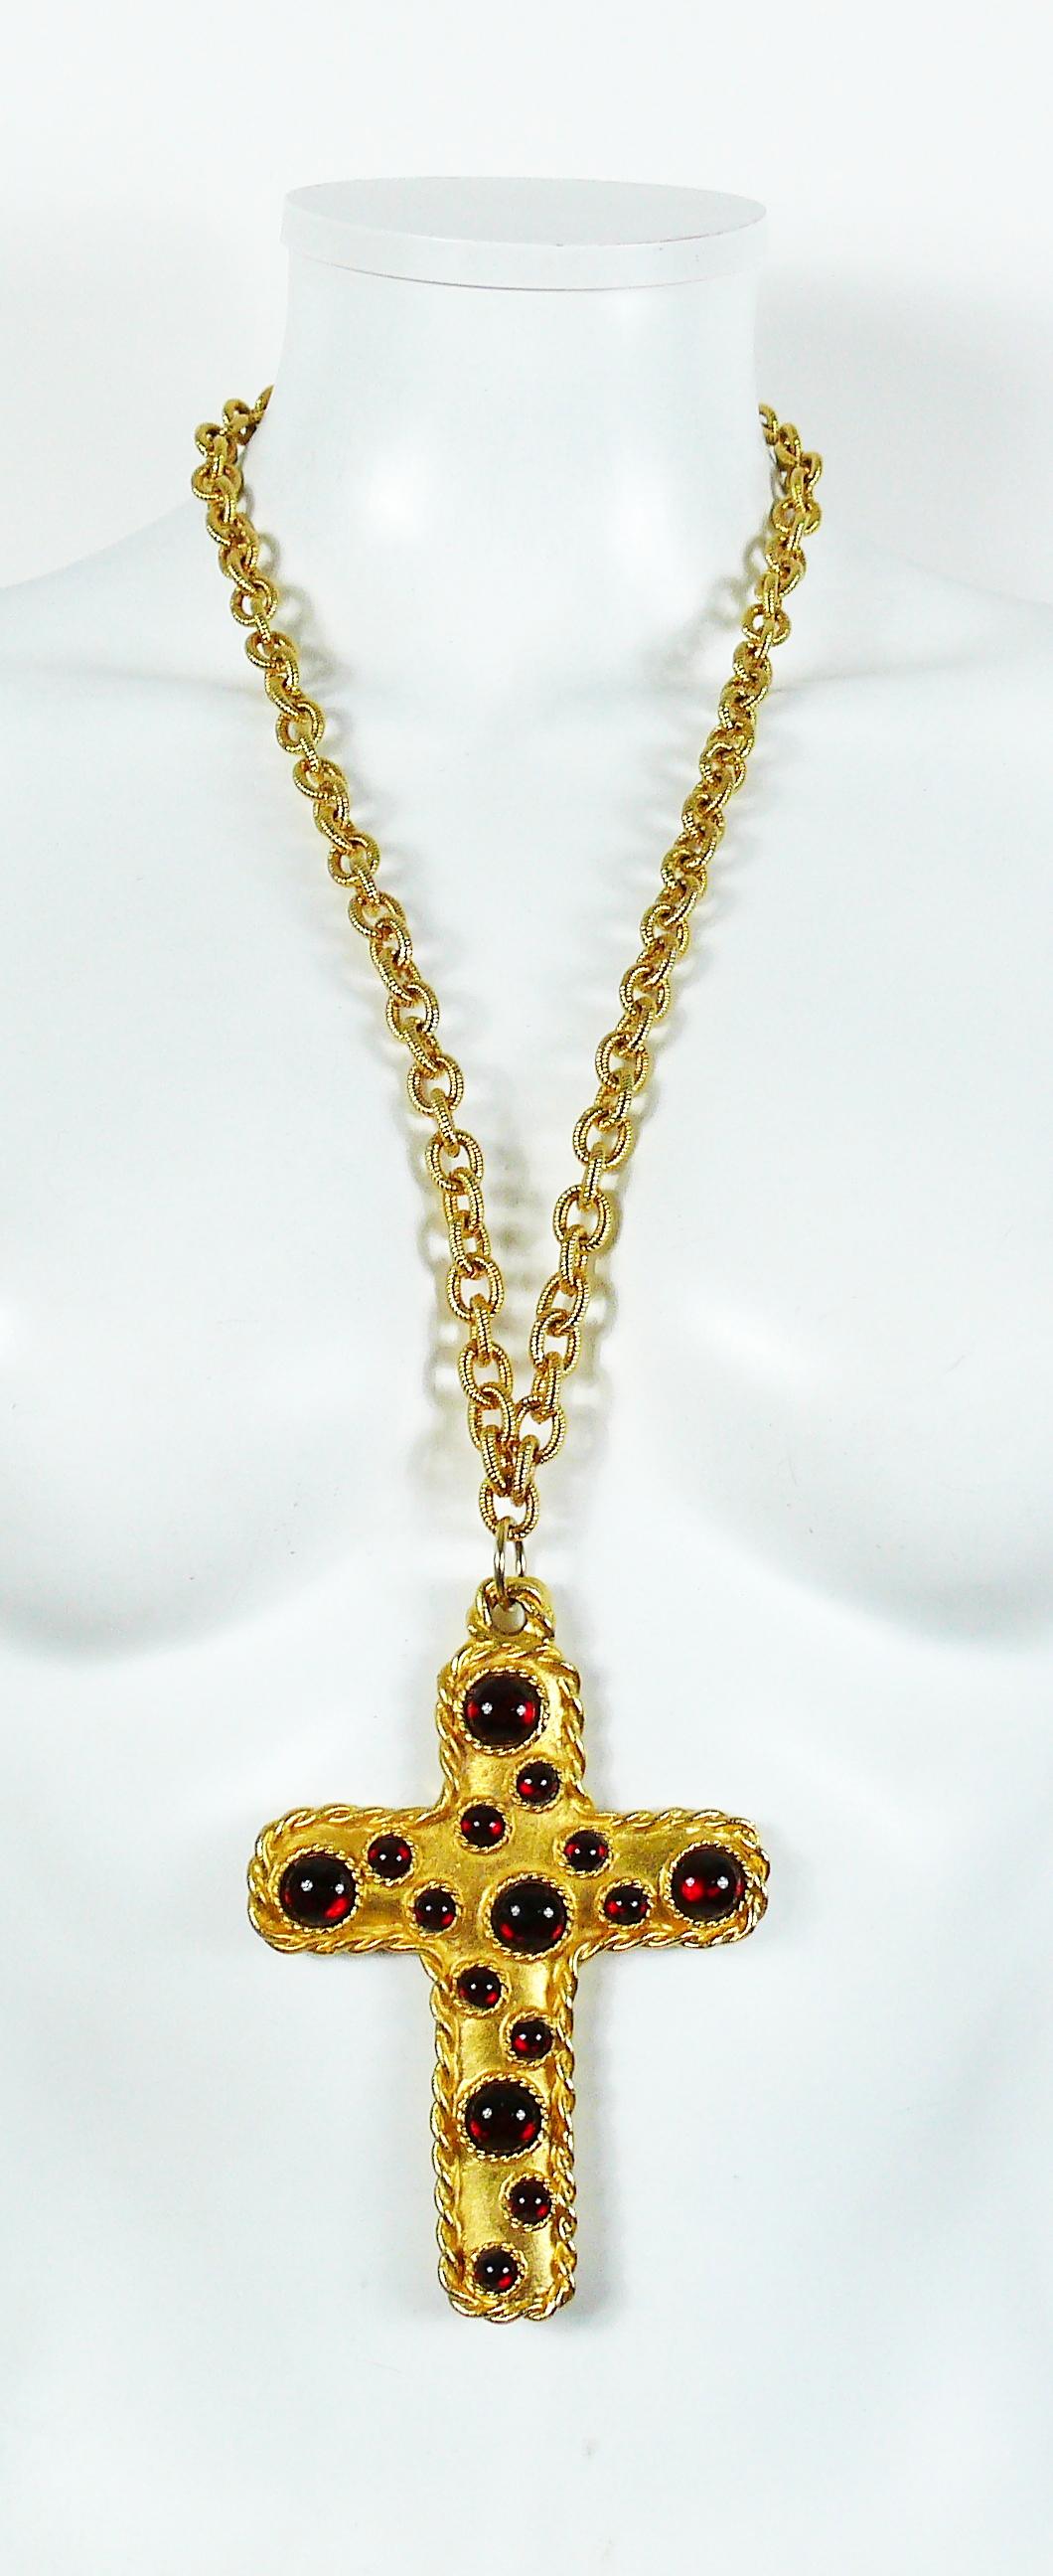 ESCADA vintage gold toned pendant necklace featuring a massive cross embellished with red glass cabochon and a chunky textured chain.

Spring clasp closure.

Embossed ESCADA on both cross and chain.

Indicative measurements : total chain lenght